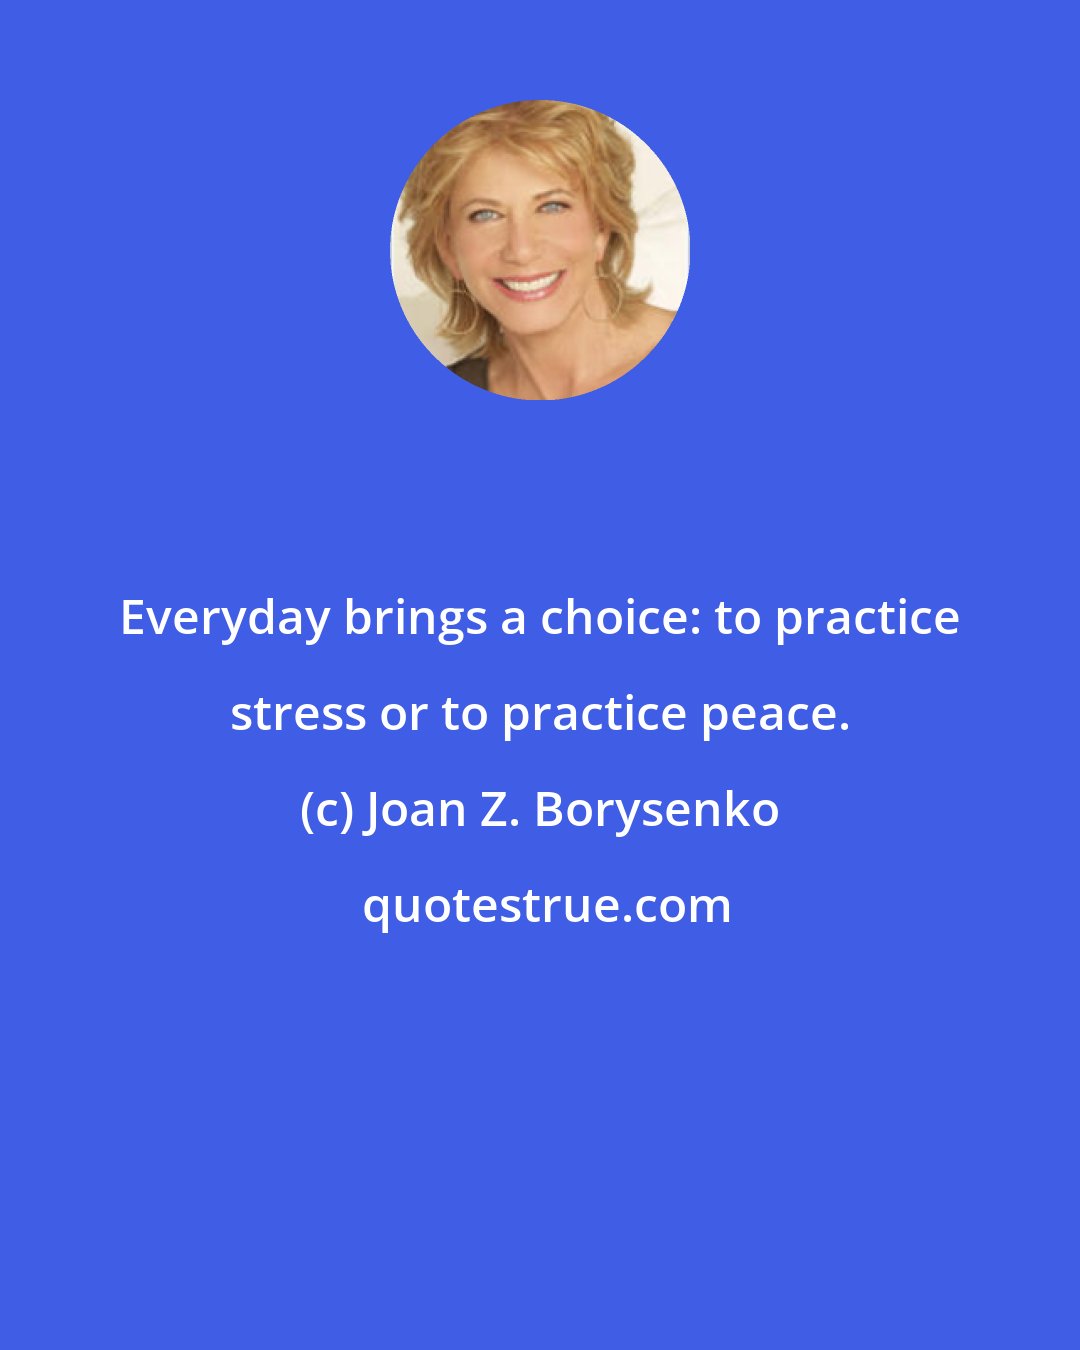 Joan Z. Borysenko: Everyday brings a choice: to practice stress or to practice peace.